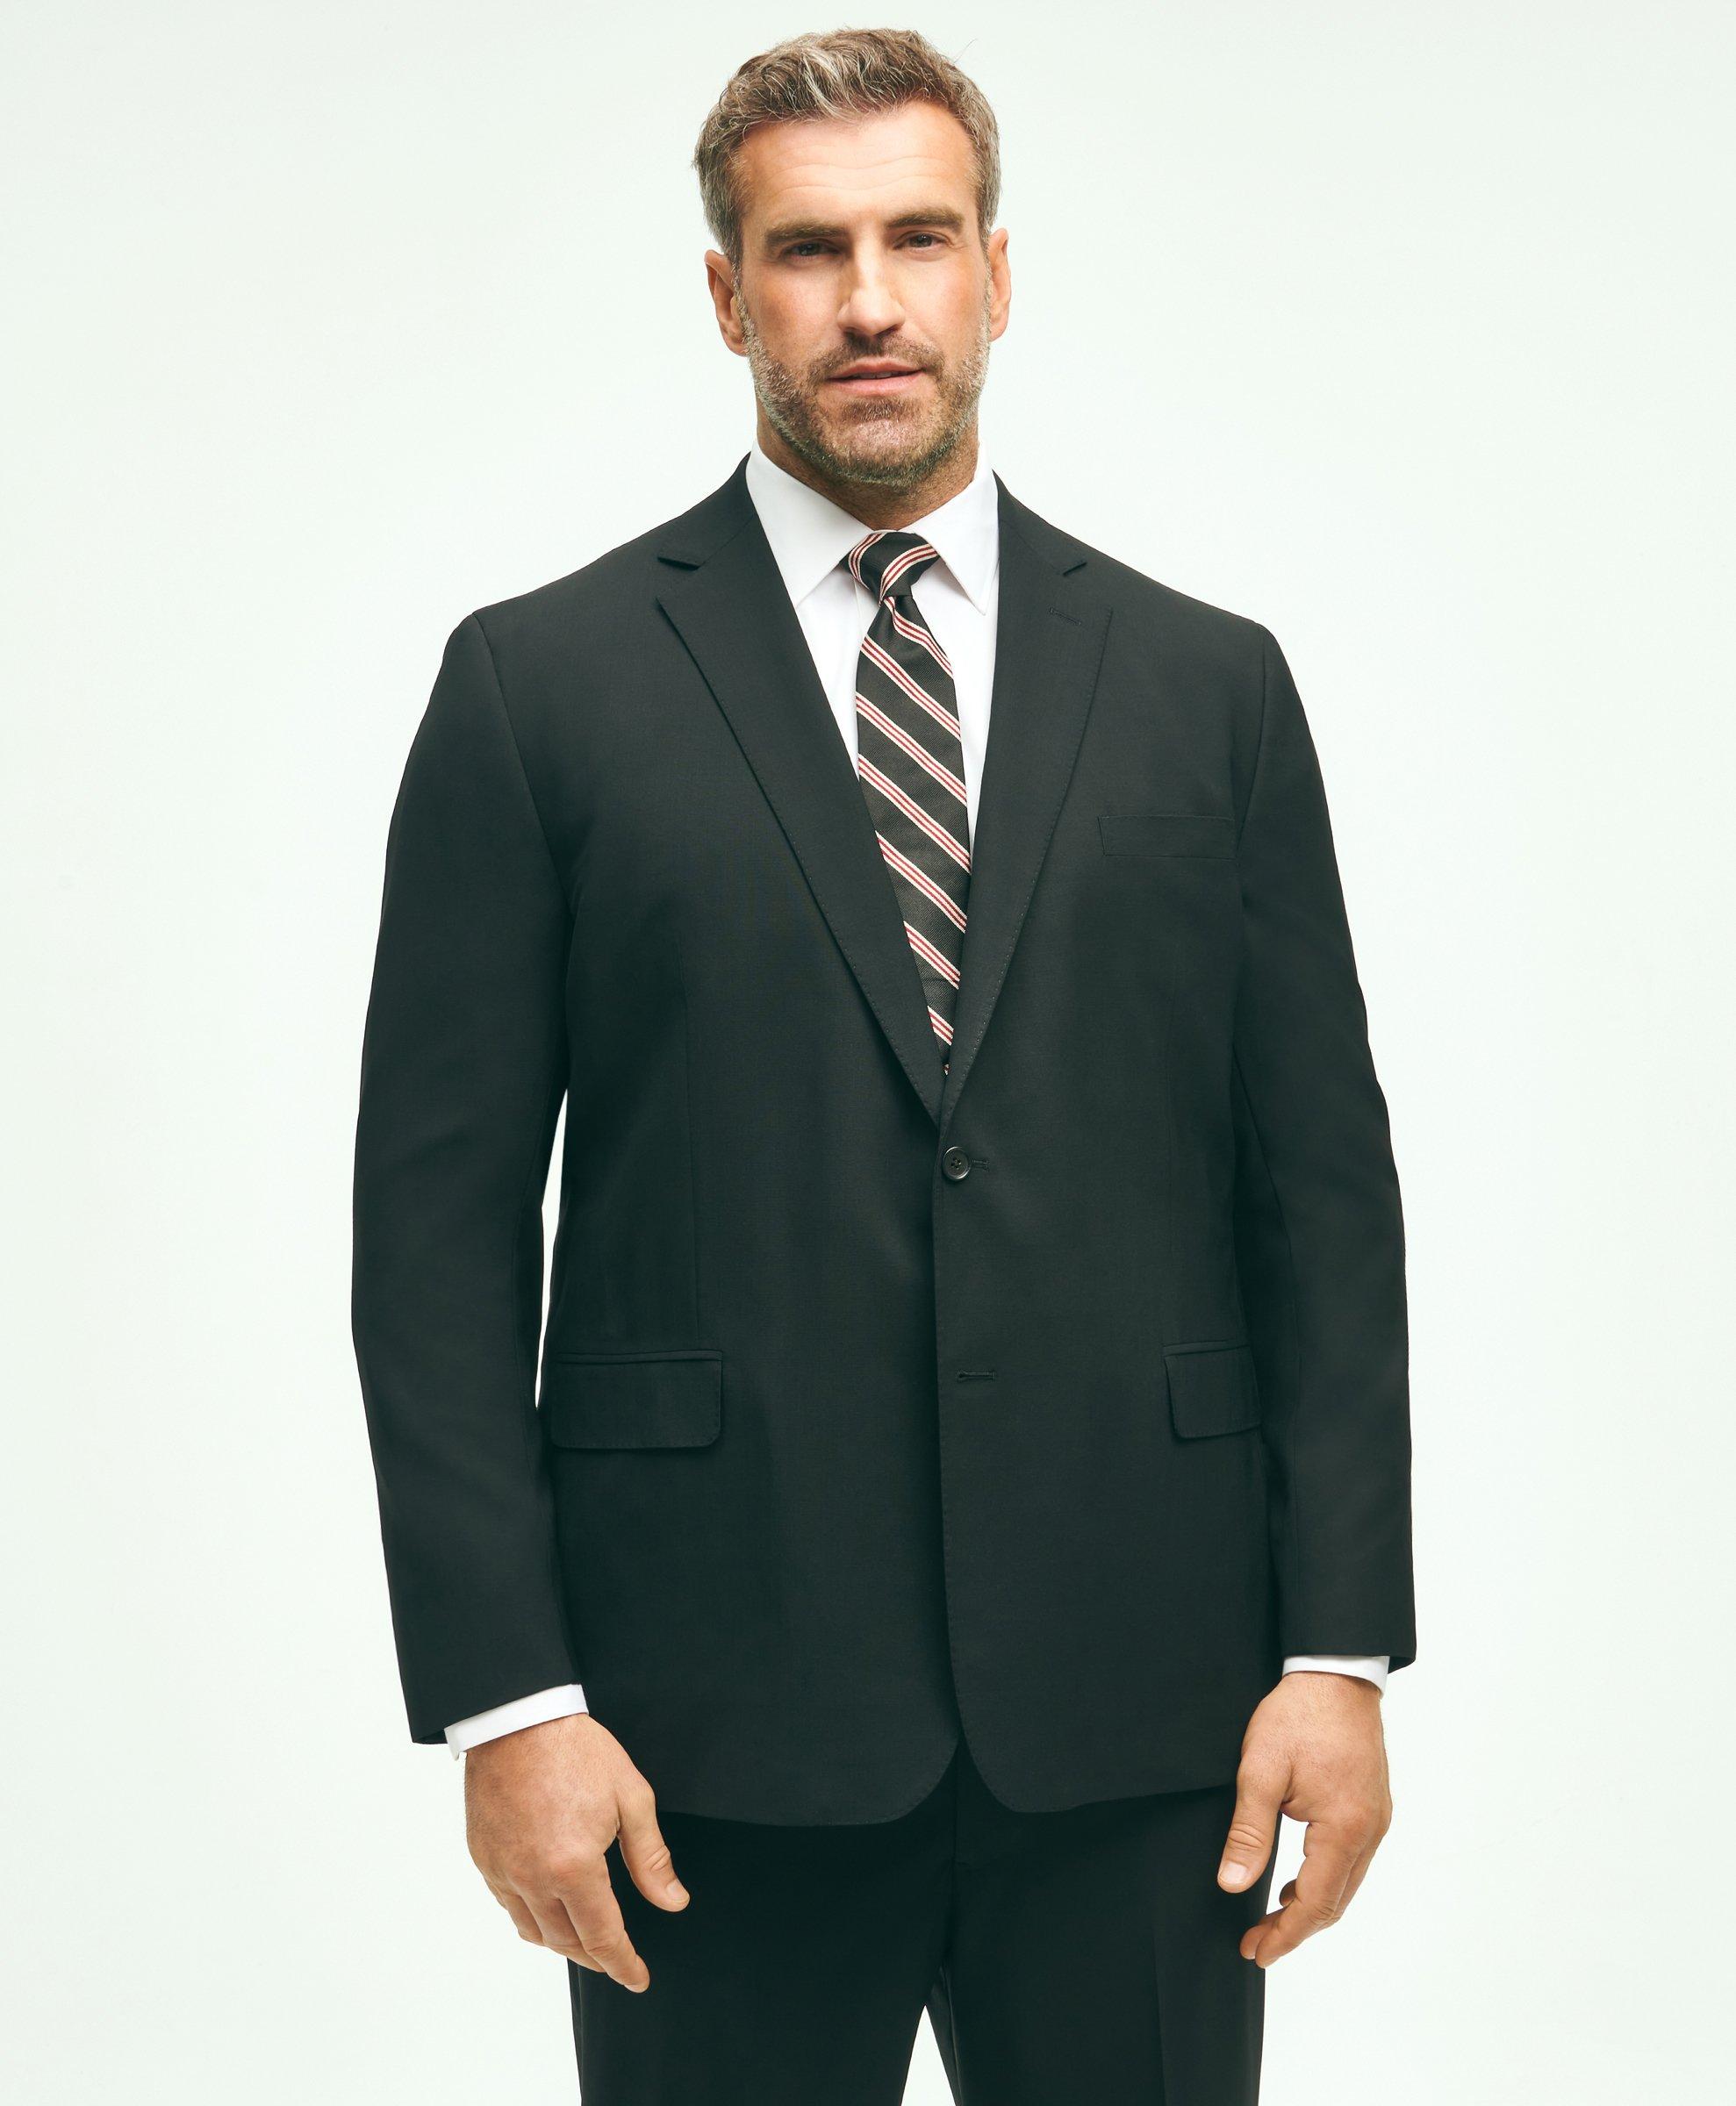 Big and Tall Men's Suits